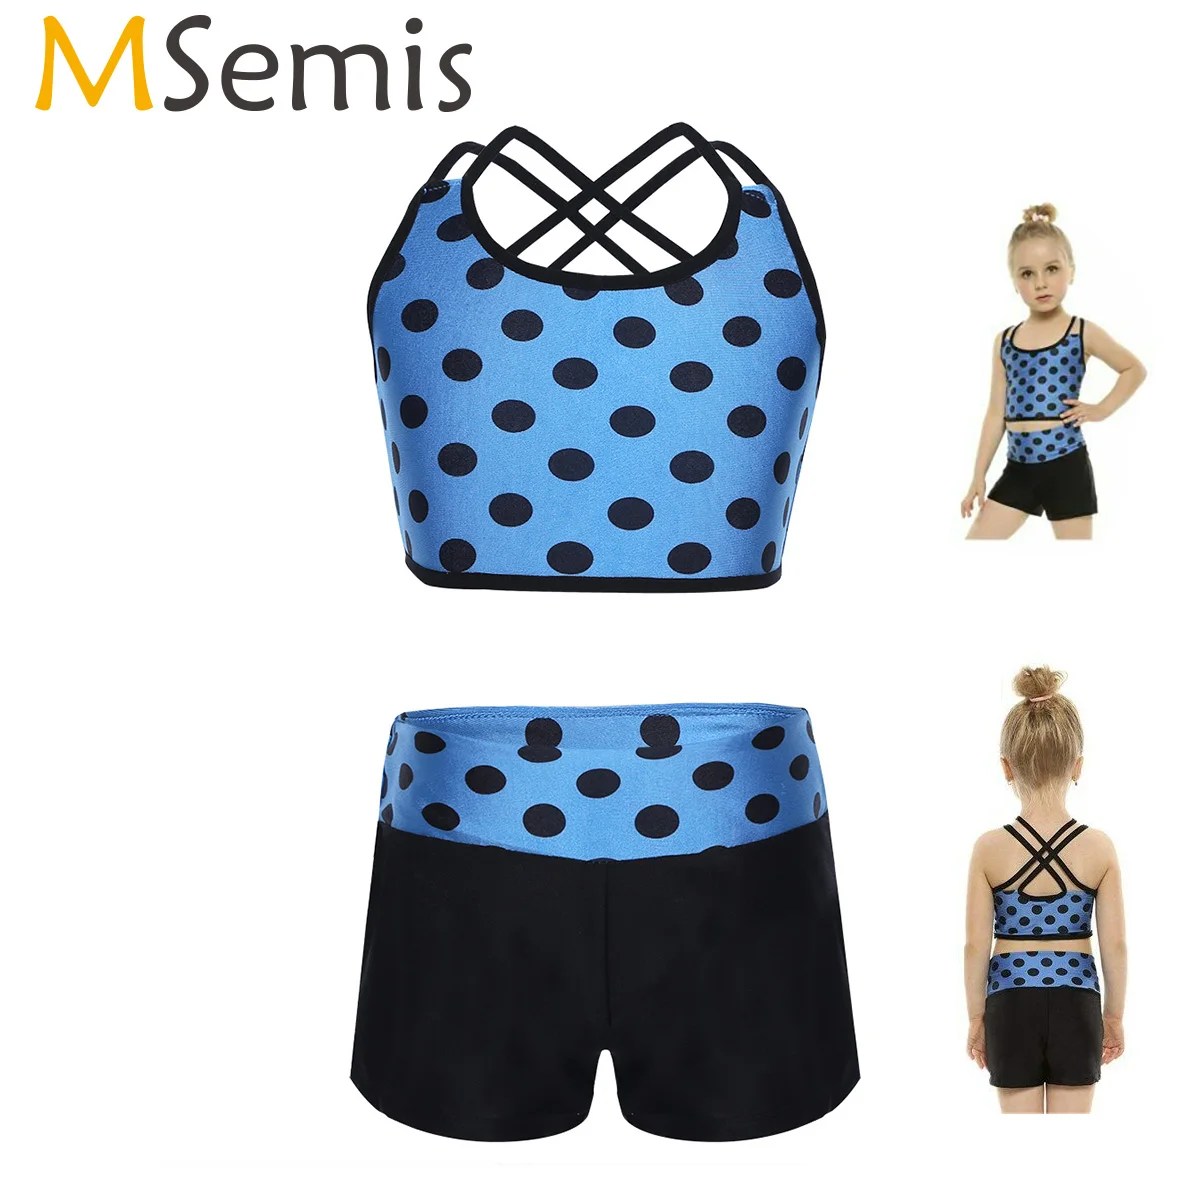 Nimiya Children Girls Two Piece Sequins Ballet Dance Gymnastic Outfits Tankini Set Criss Cross Back Top Tanks with Bottoms